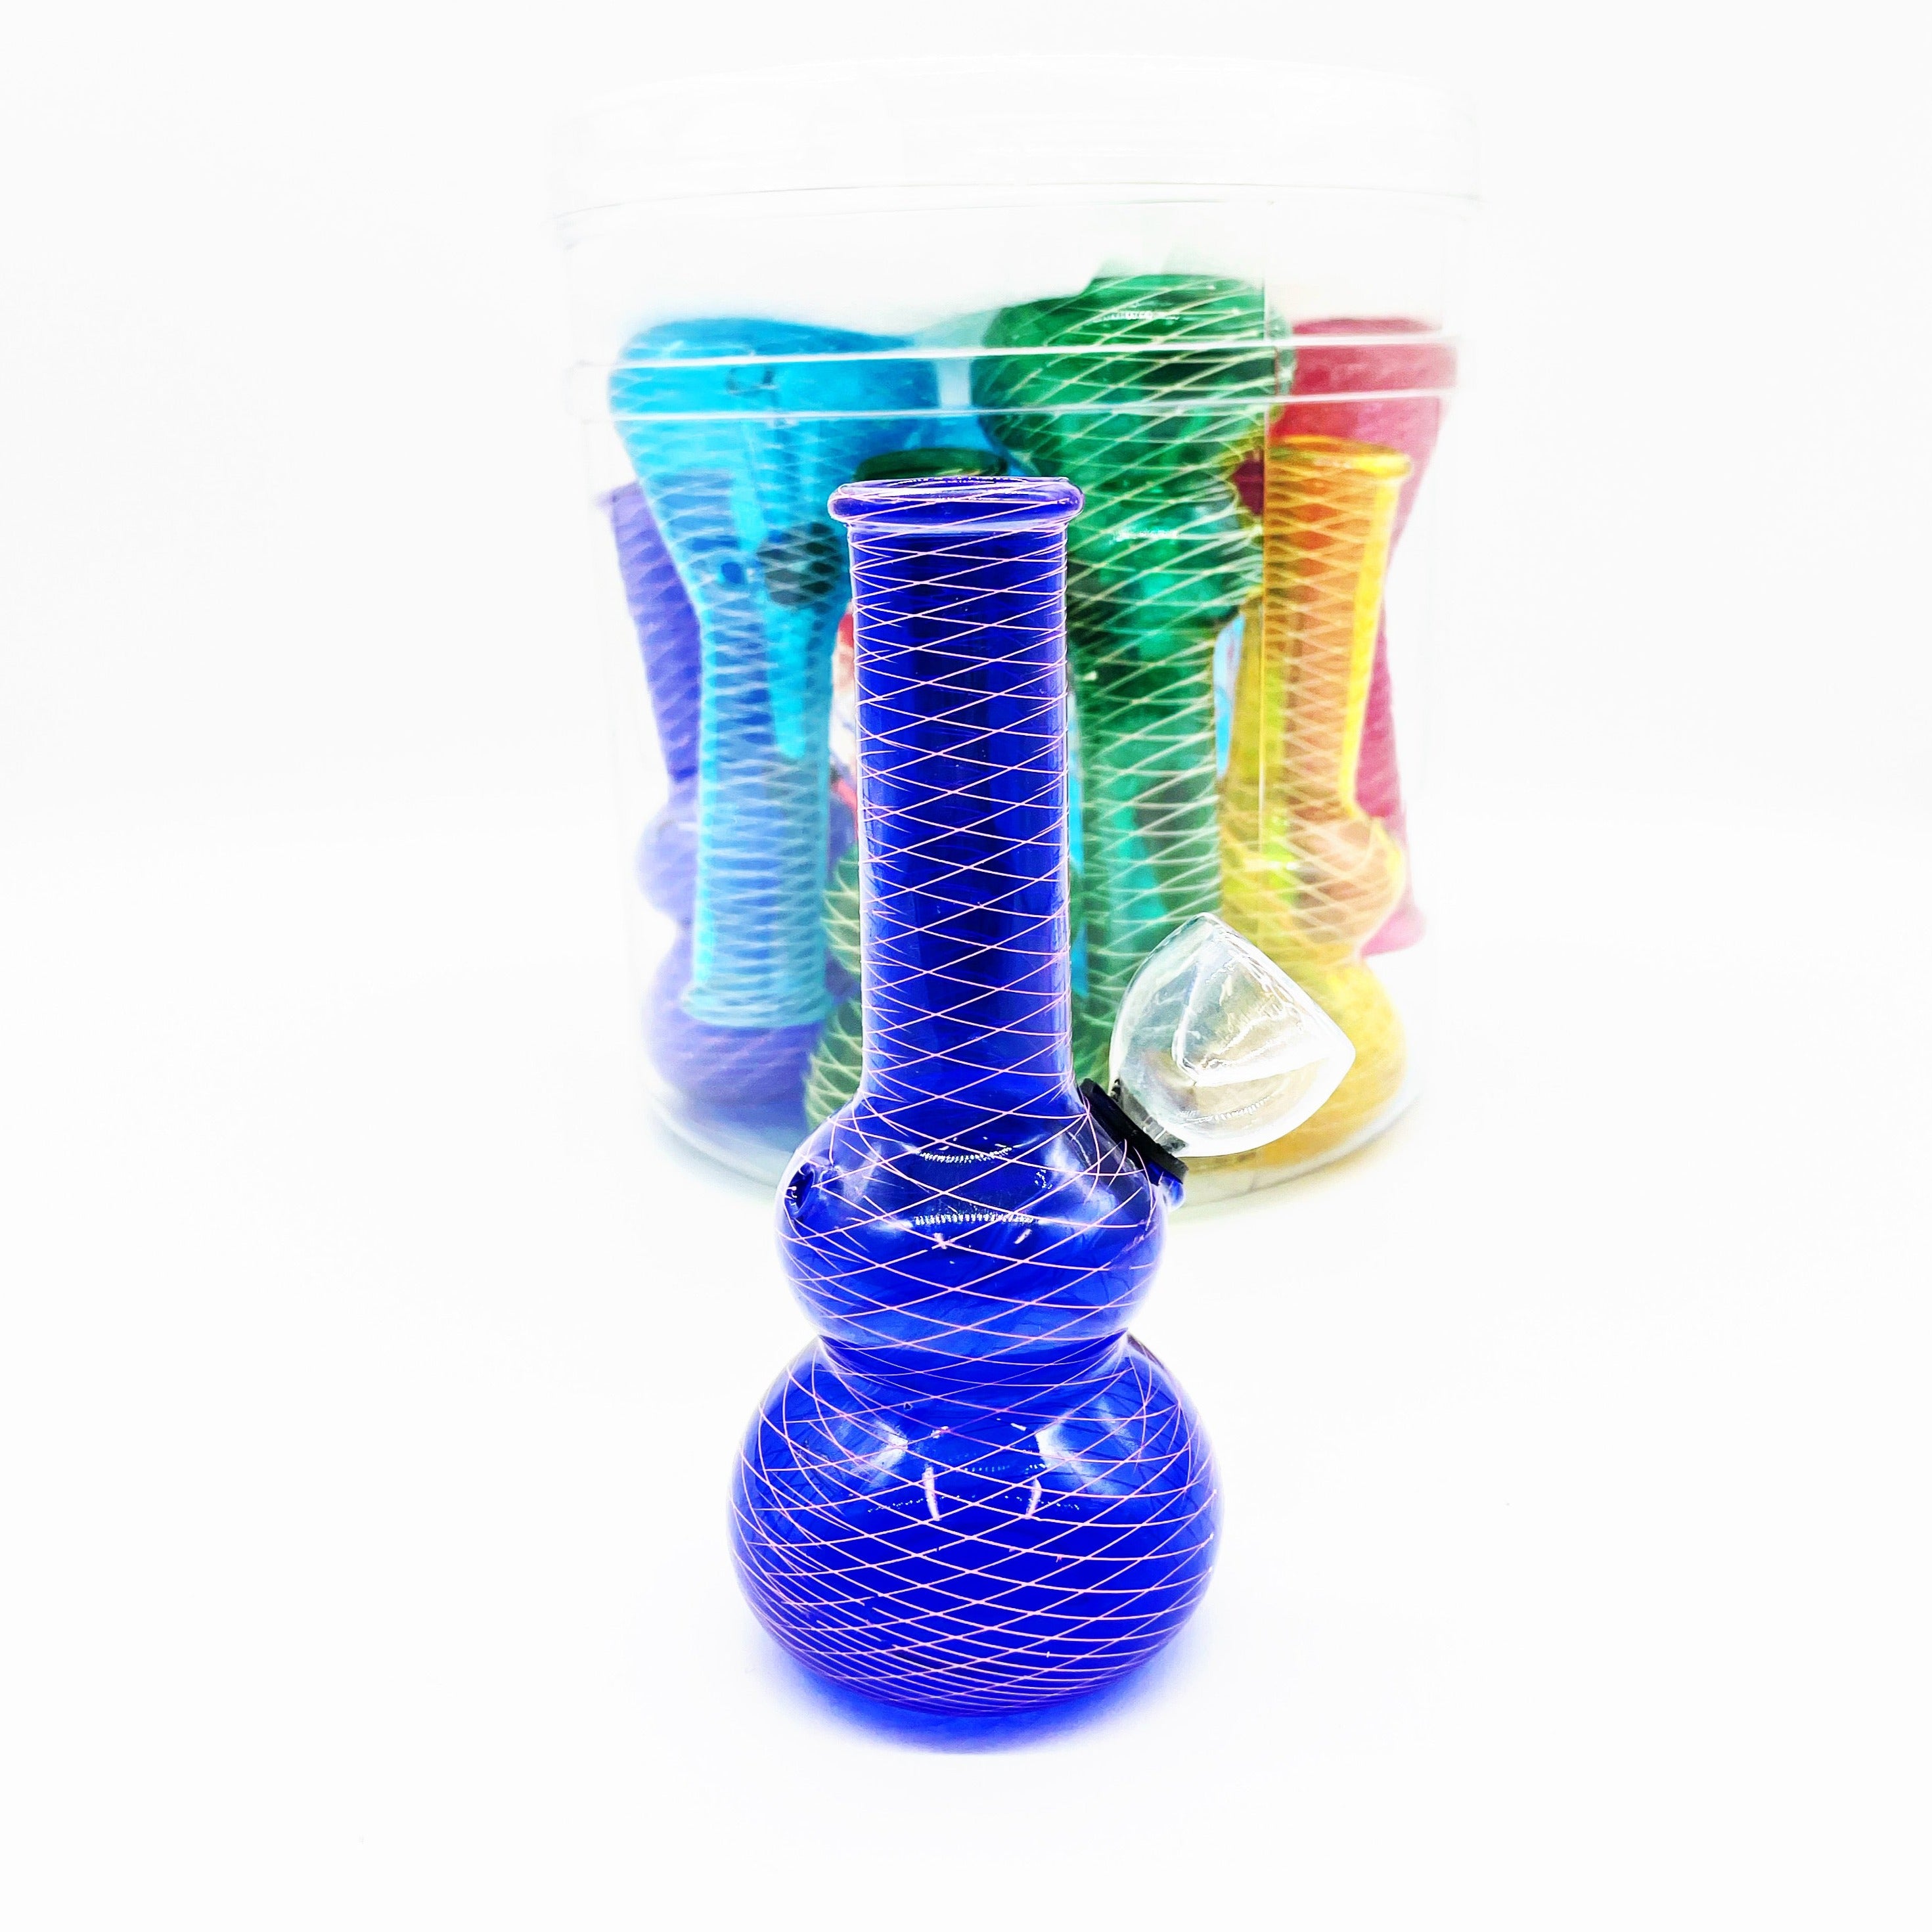 4'' Assorted Colored Glass Waterpipes - 1 Jar / 11ct